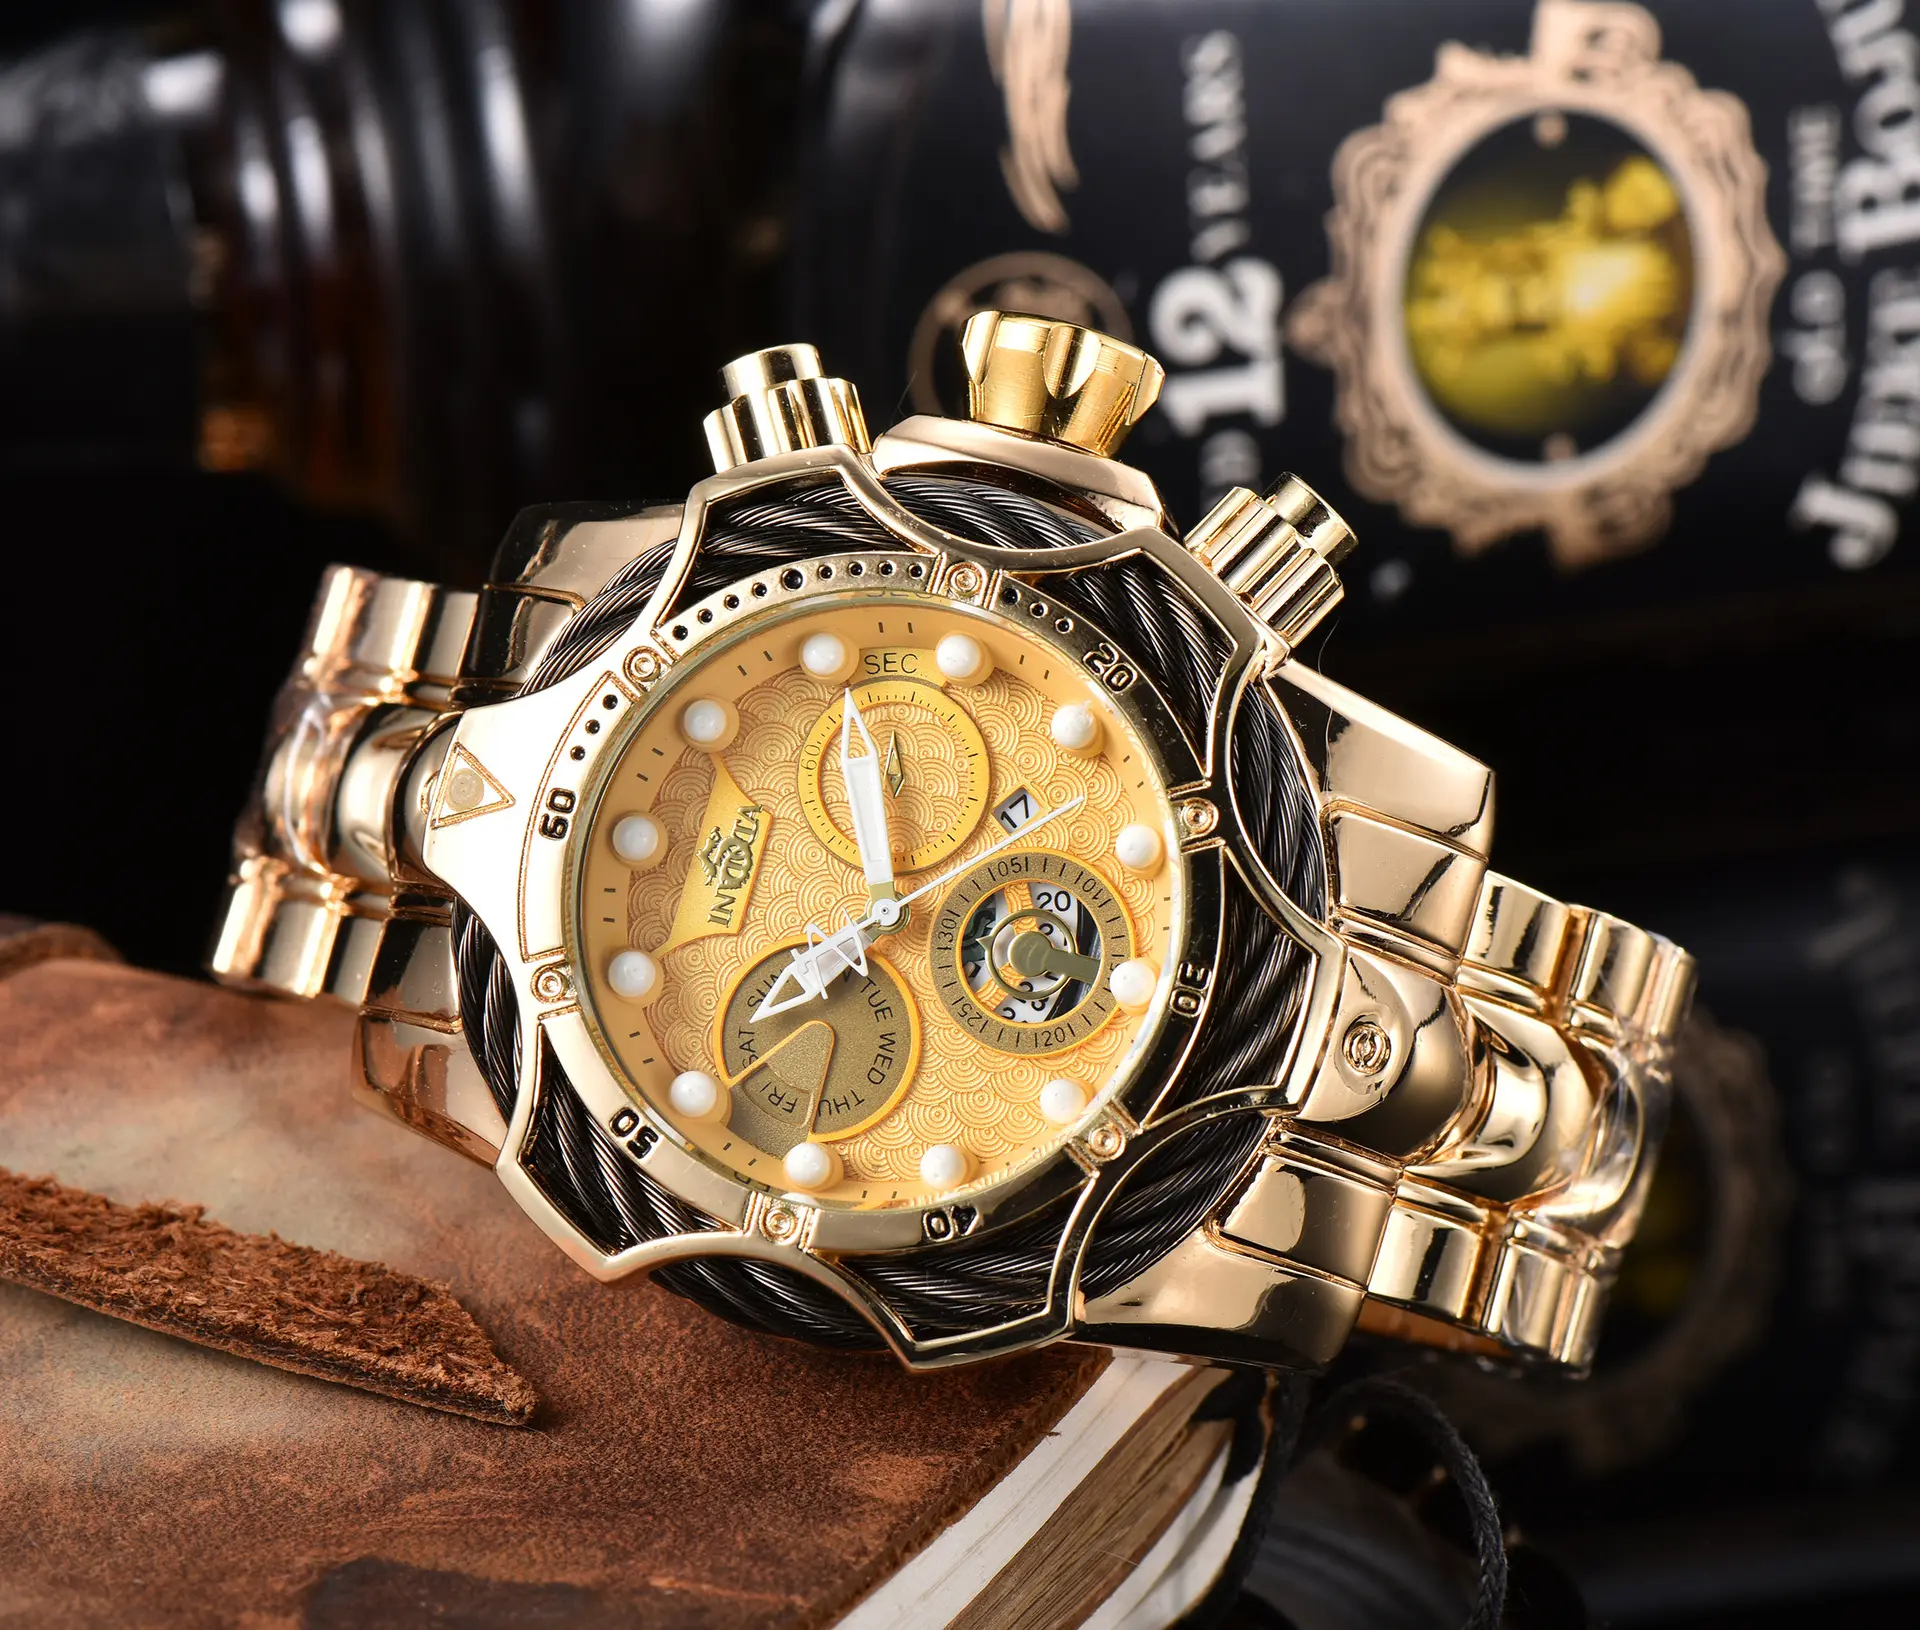 Invicta For Men China Trade,Buy China Direct From Invicta For Men 